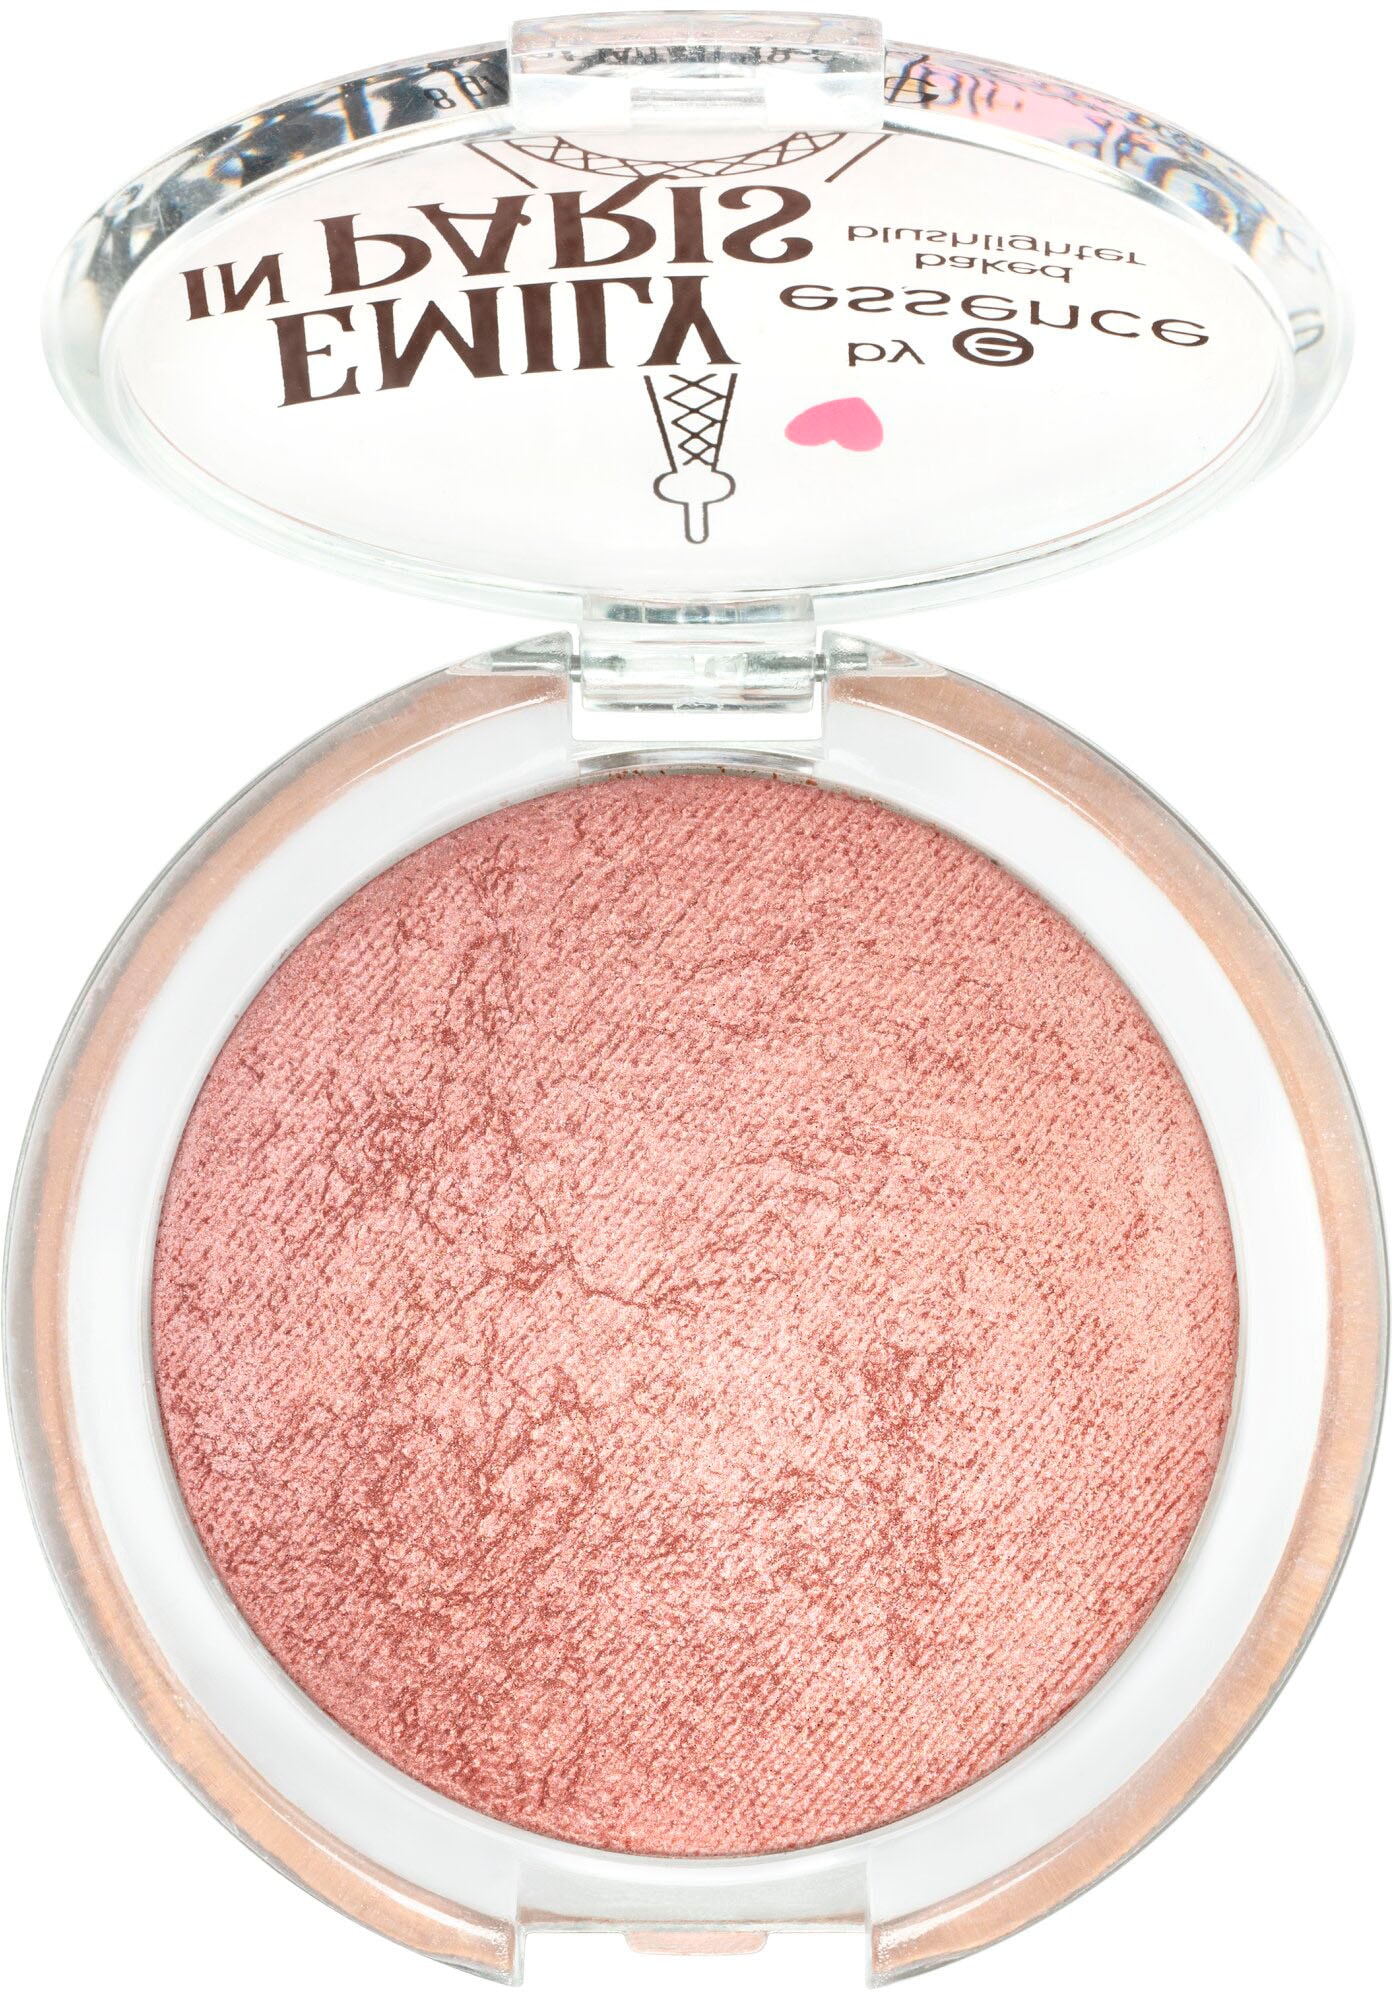 PARIS Rouge baked by essence bei Essence IN online blushlighter« »EMILY